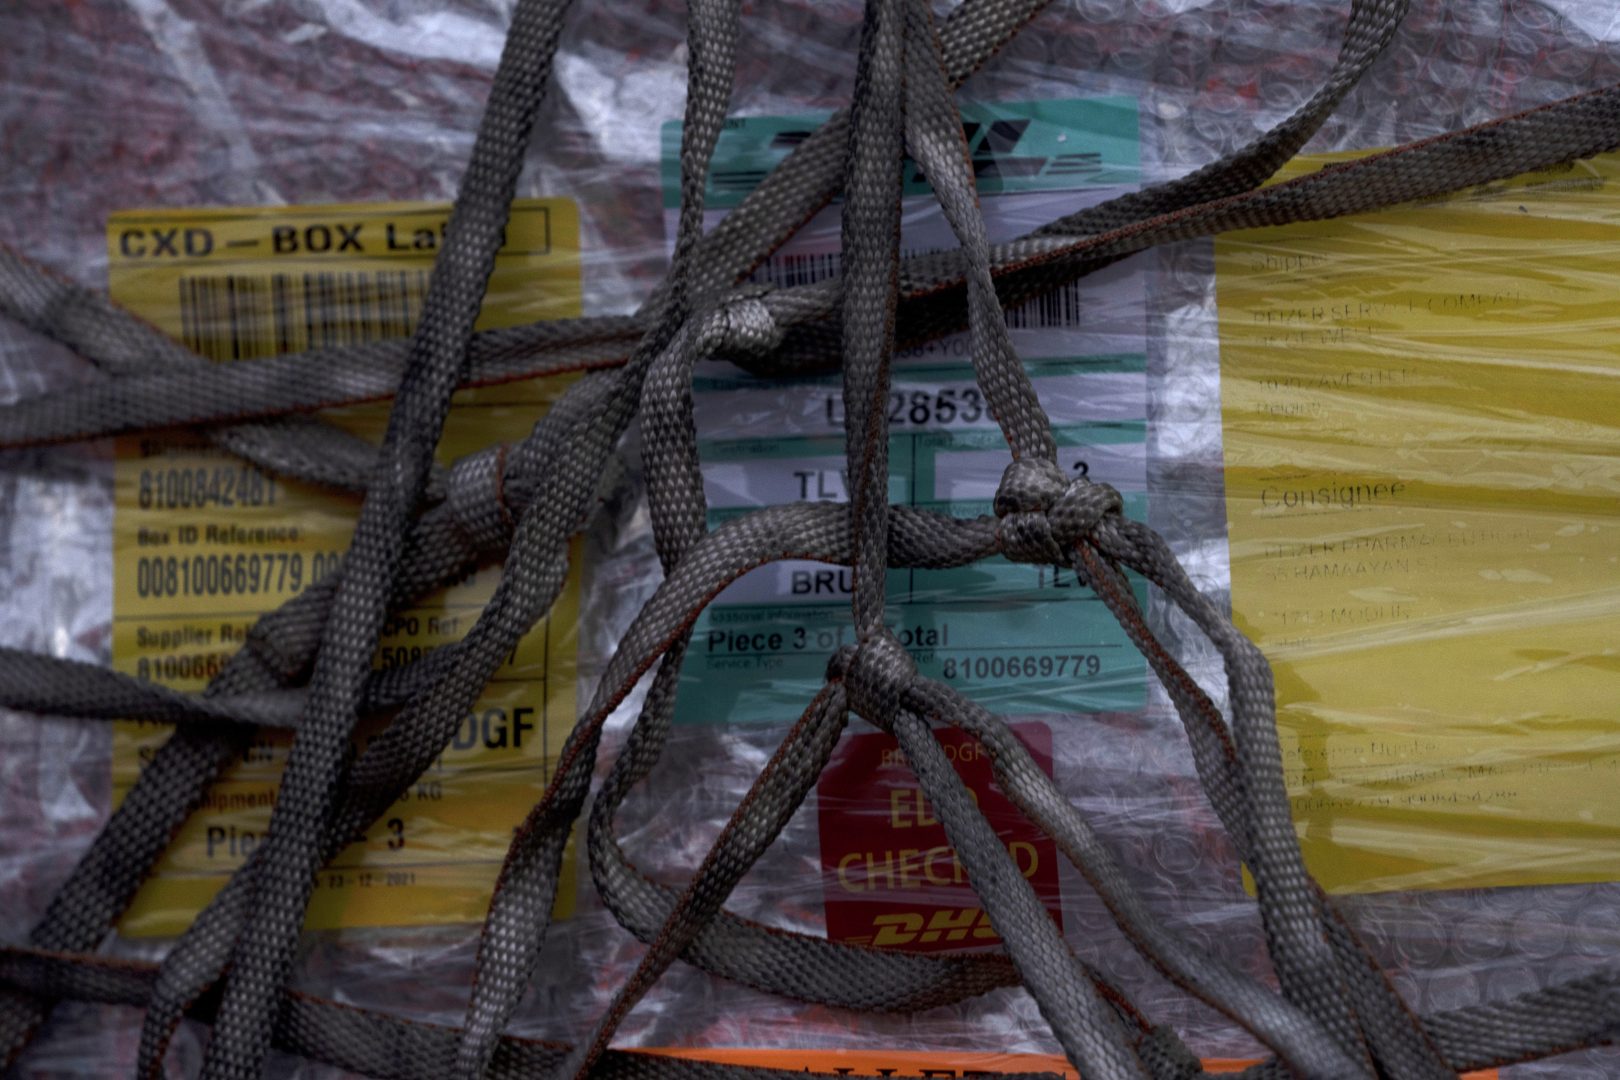 Webbing covers labels on a heavily-wrapped shipment of Pfizer's antiviral COVID-19 pill, Paxlovid, on arrival at Ben Gurion International airport near Tel Aviv, Thursday, Dec. 30, 2021. 